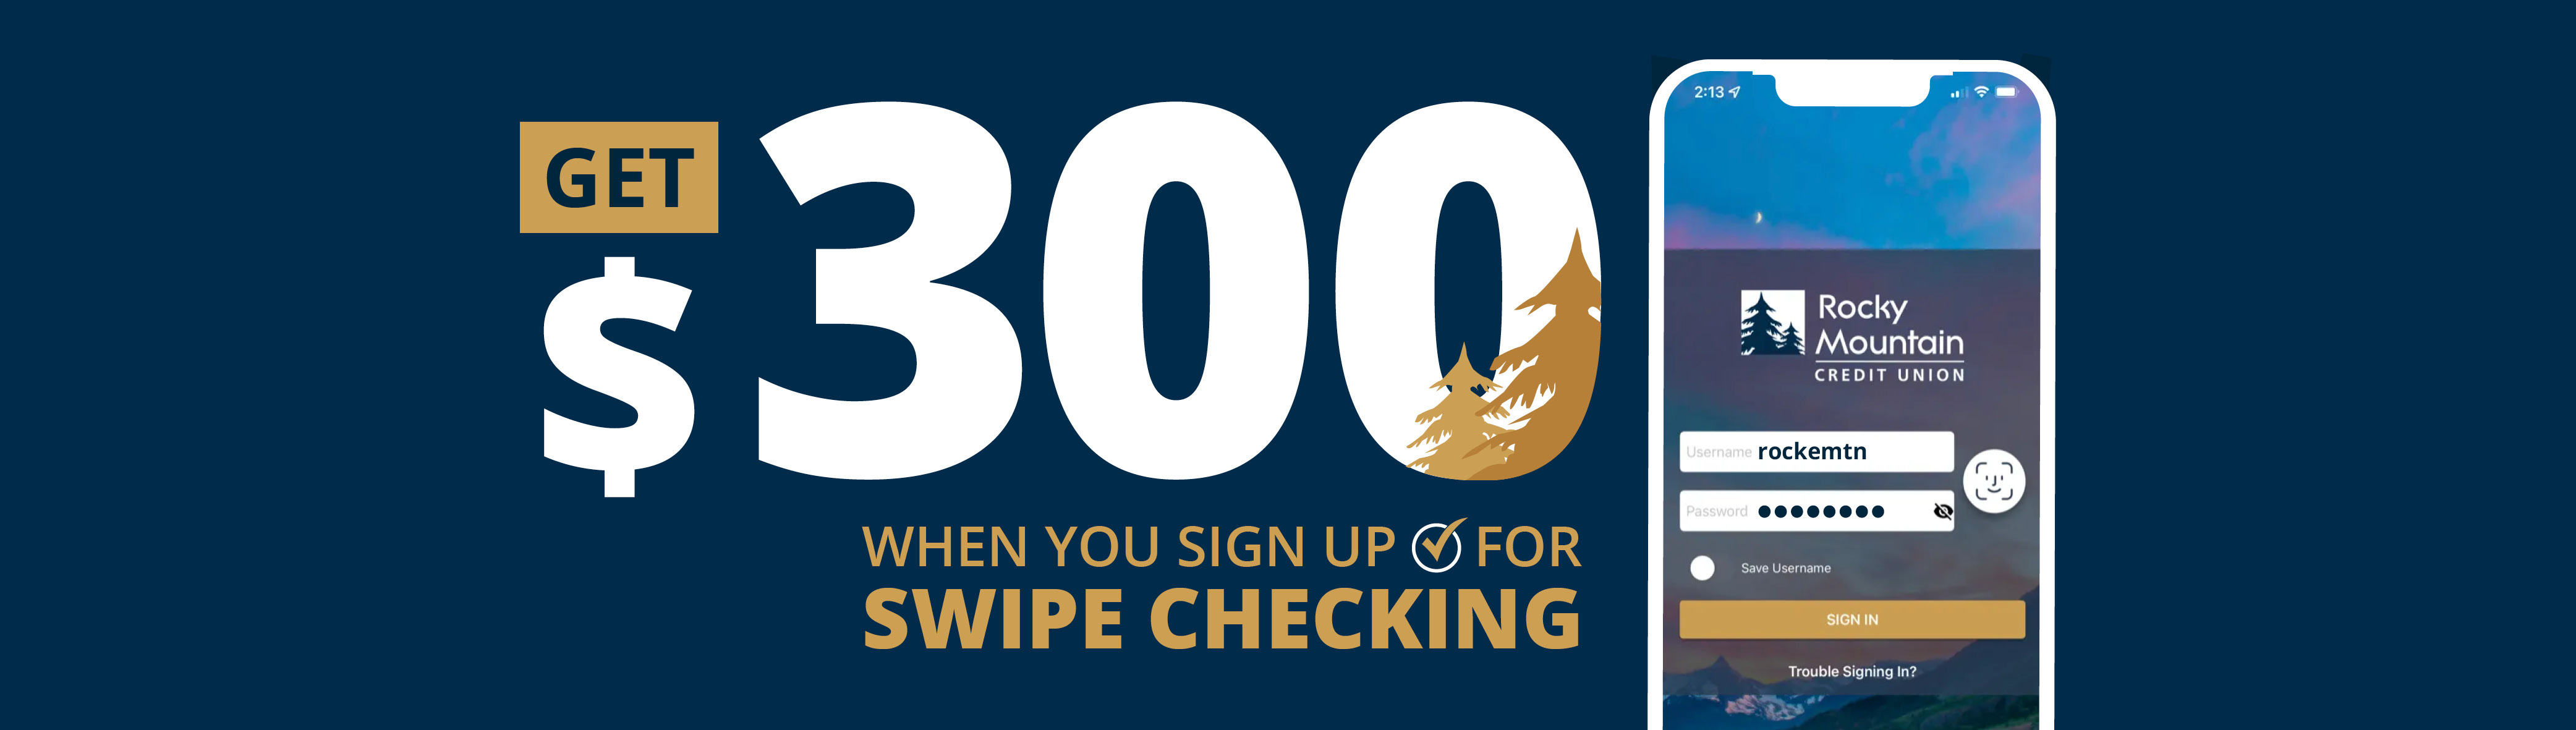 Get $300 when you sign up for SWIPE checking